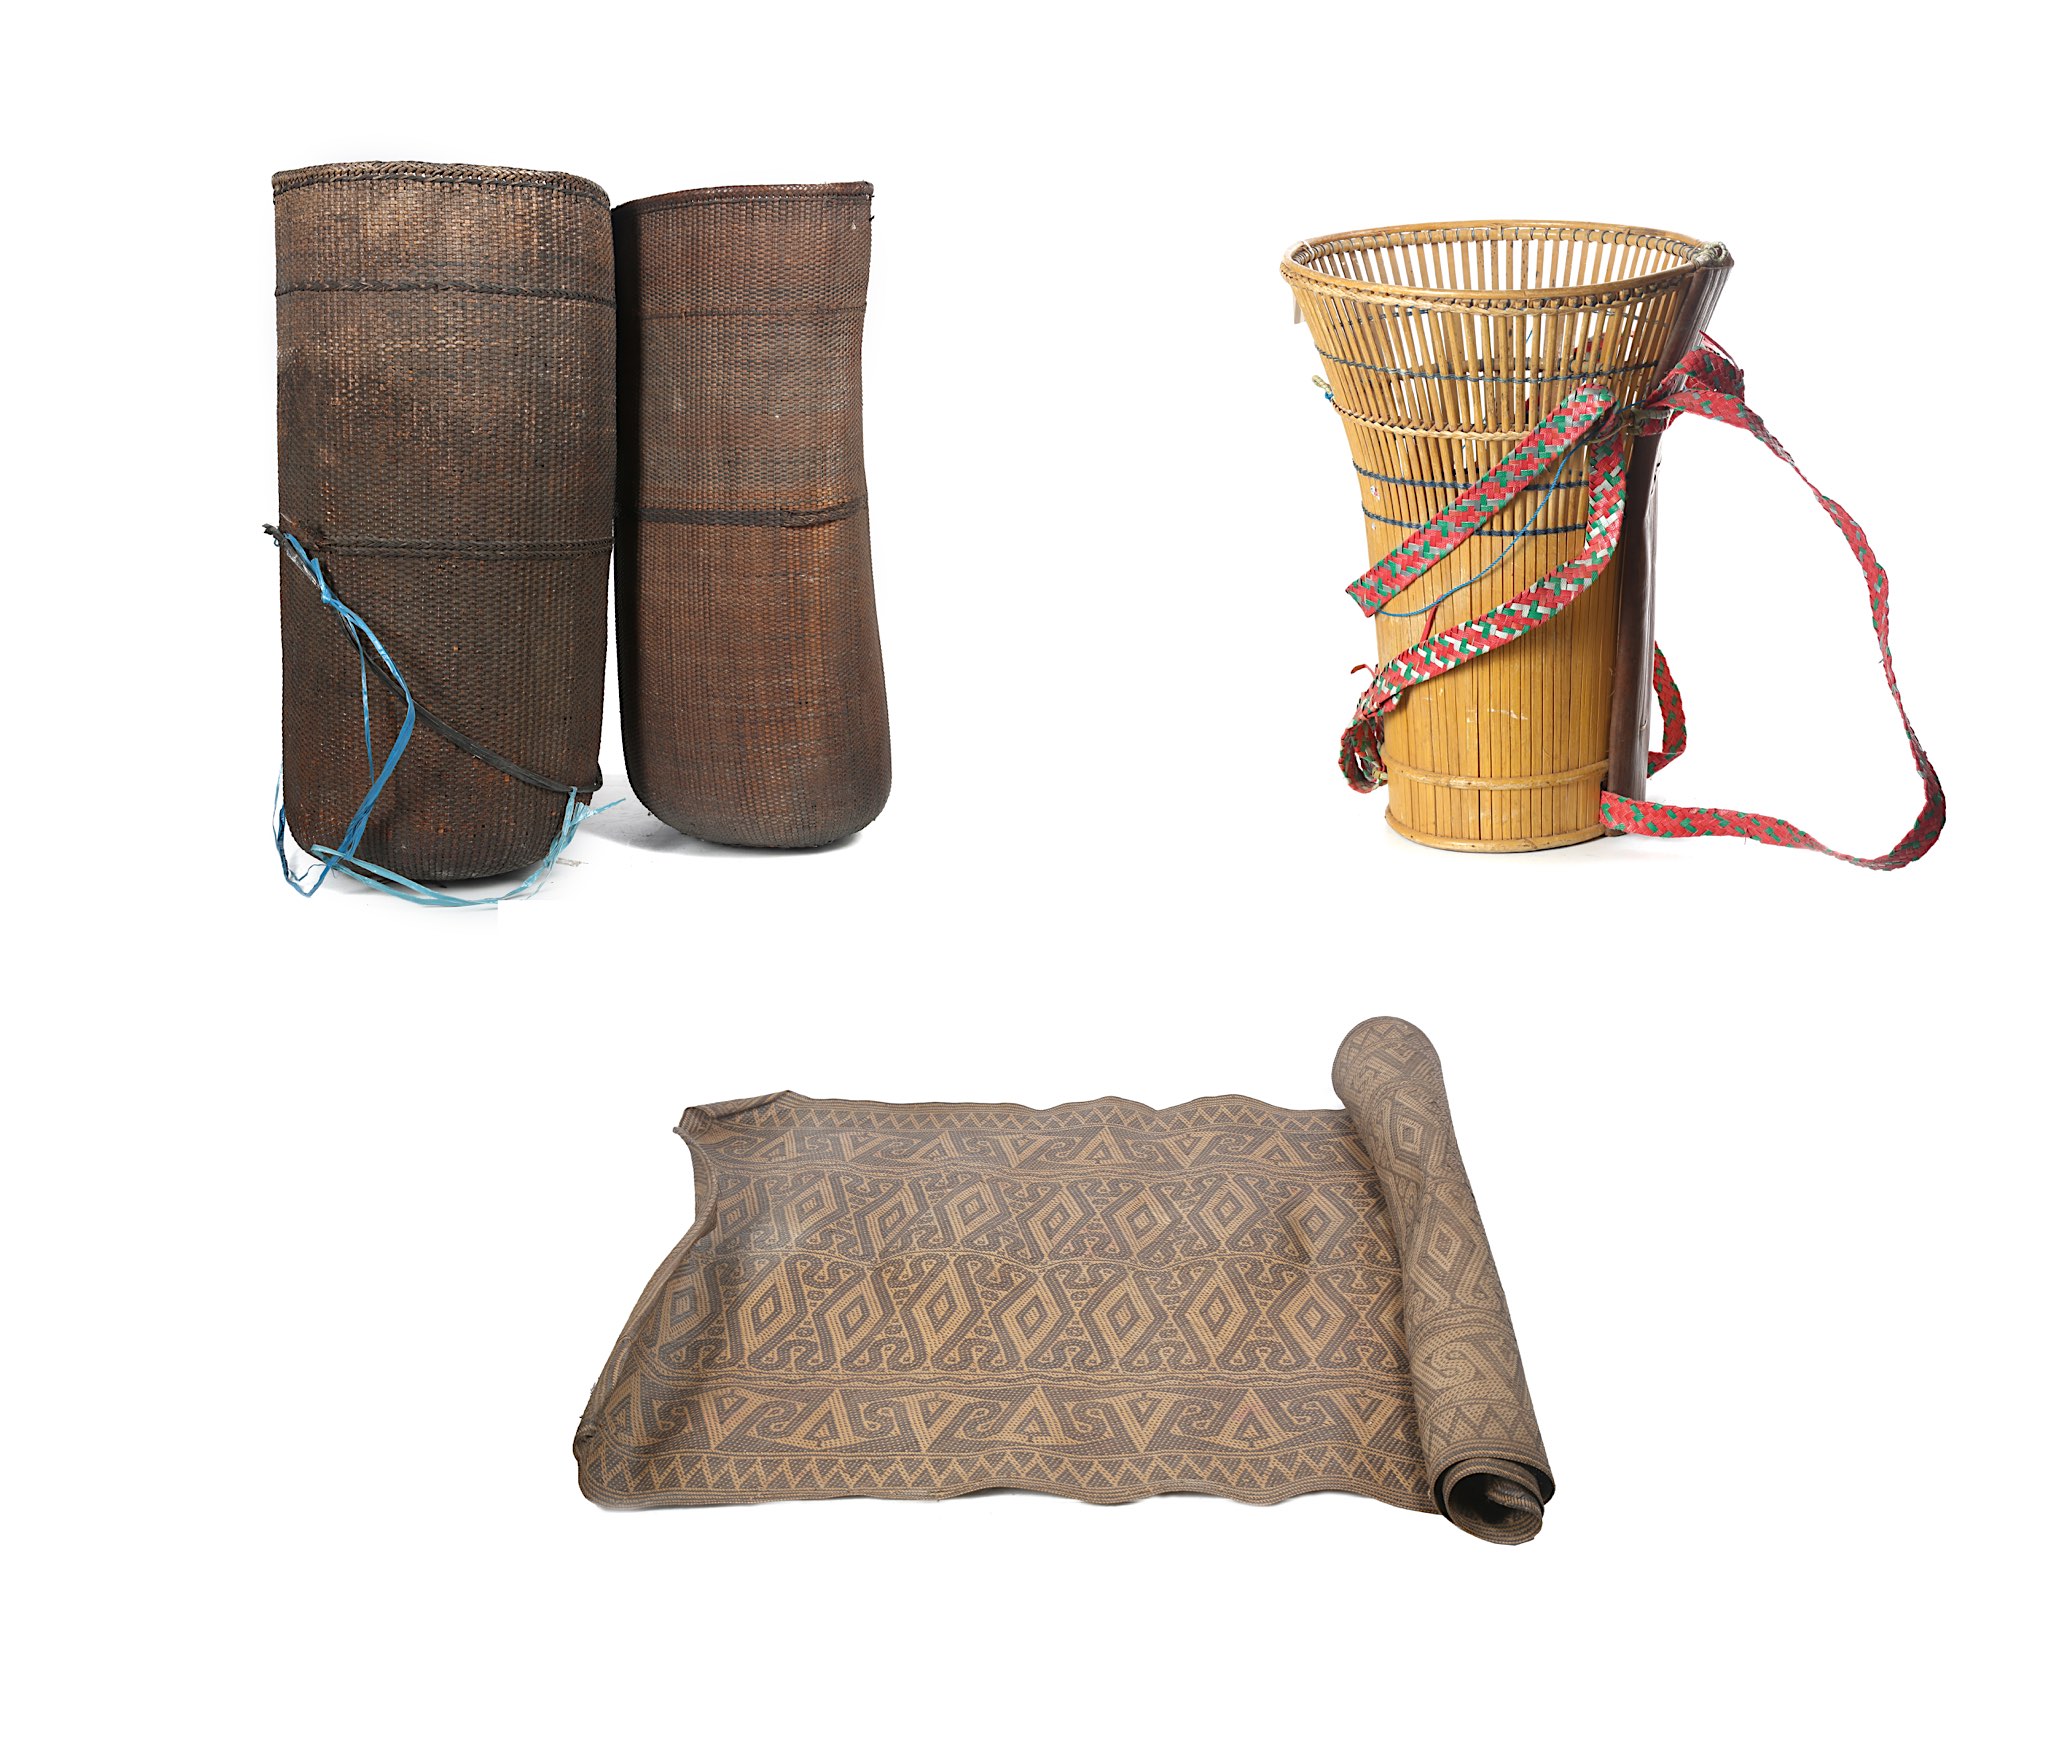 THREE BASKETS AND A WOVEN MAT, BORNEO Probably from the Dayak tribe, one basket of bamboo strands